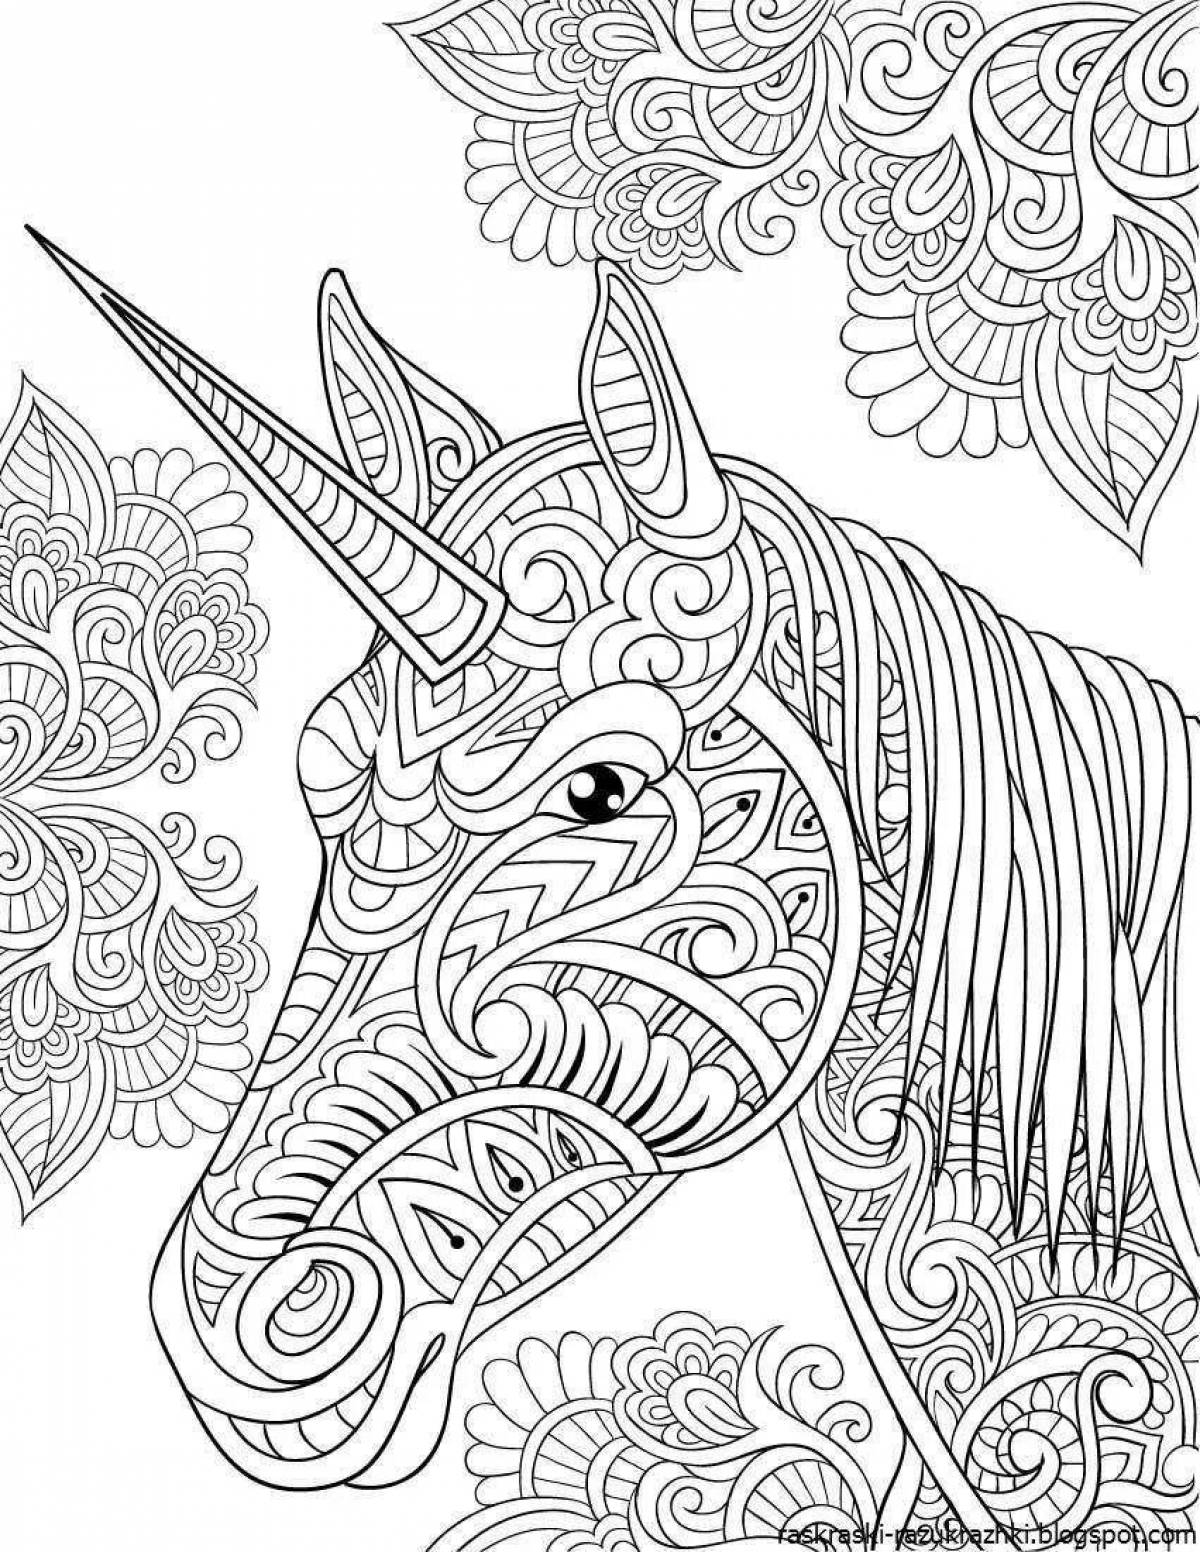 Major coloring book for adults